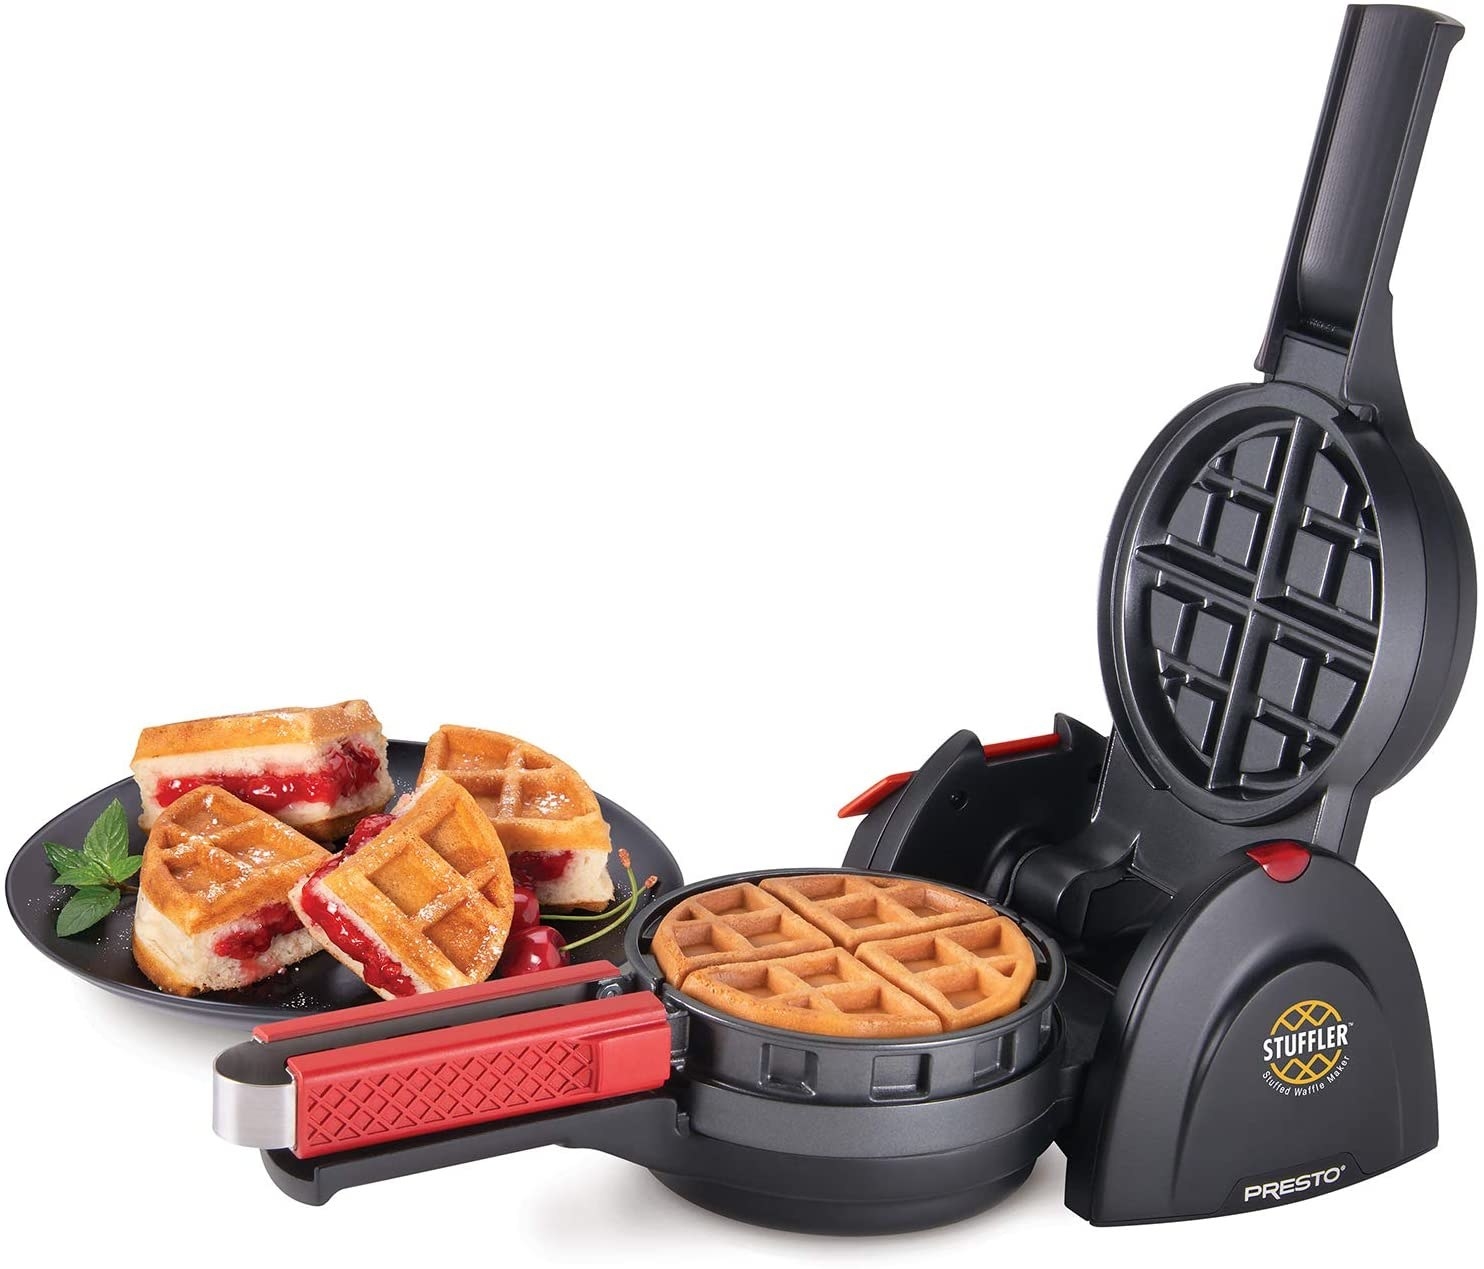 The waffle maker displaying a waffle and a plate with a sliced waffle